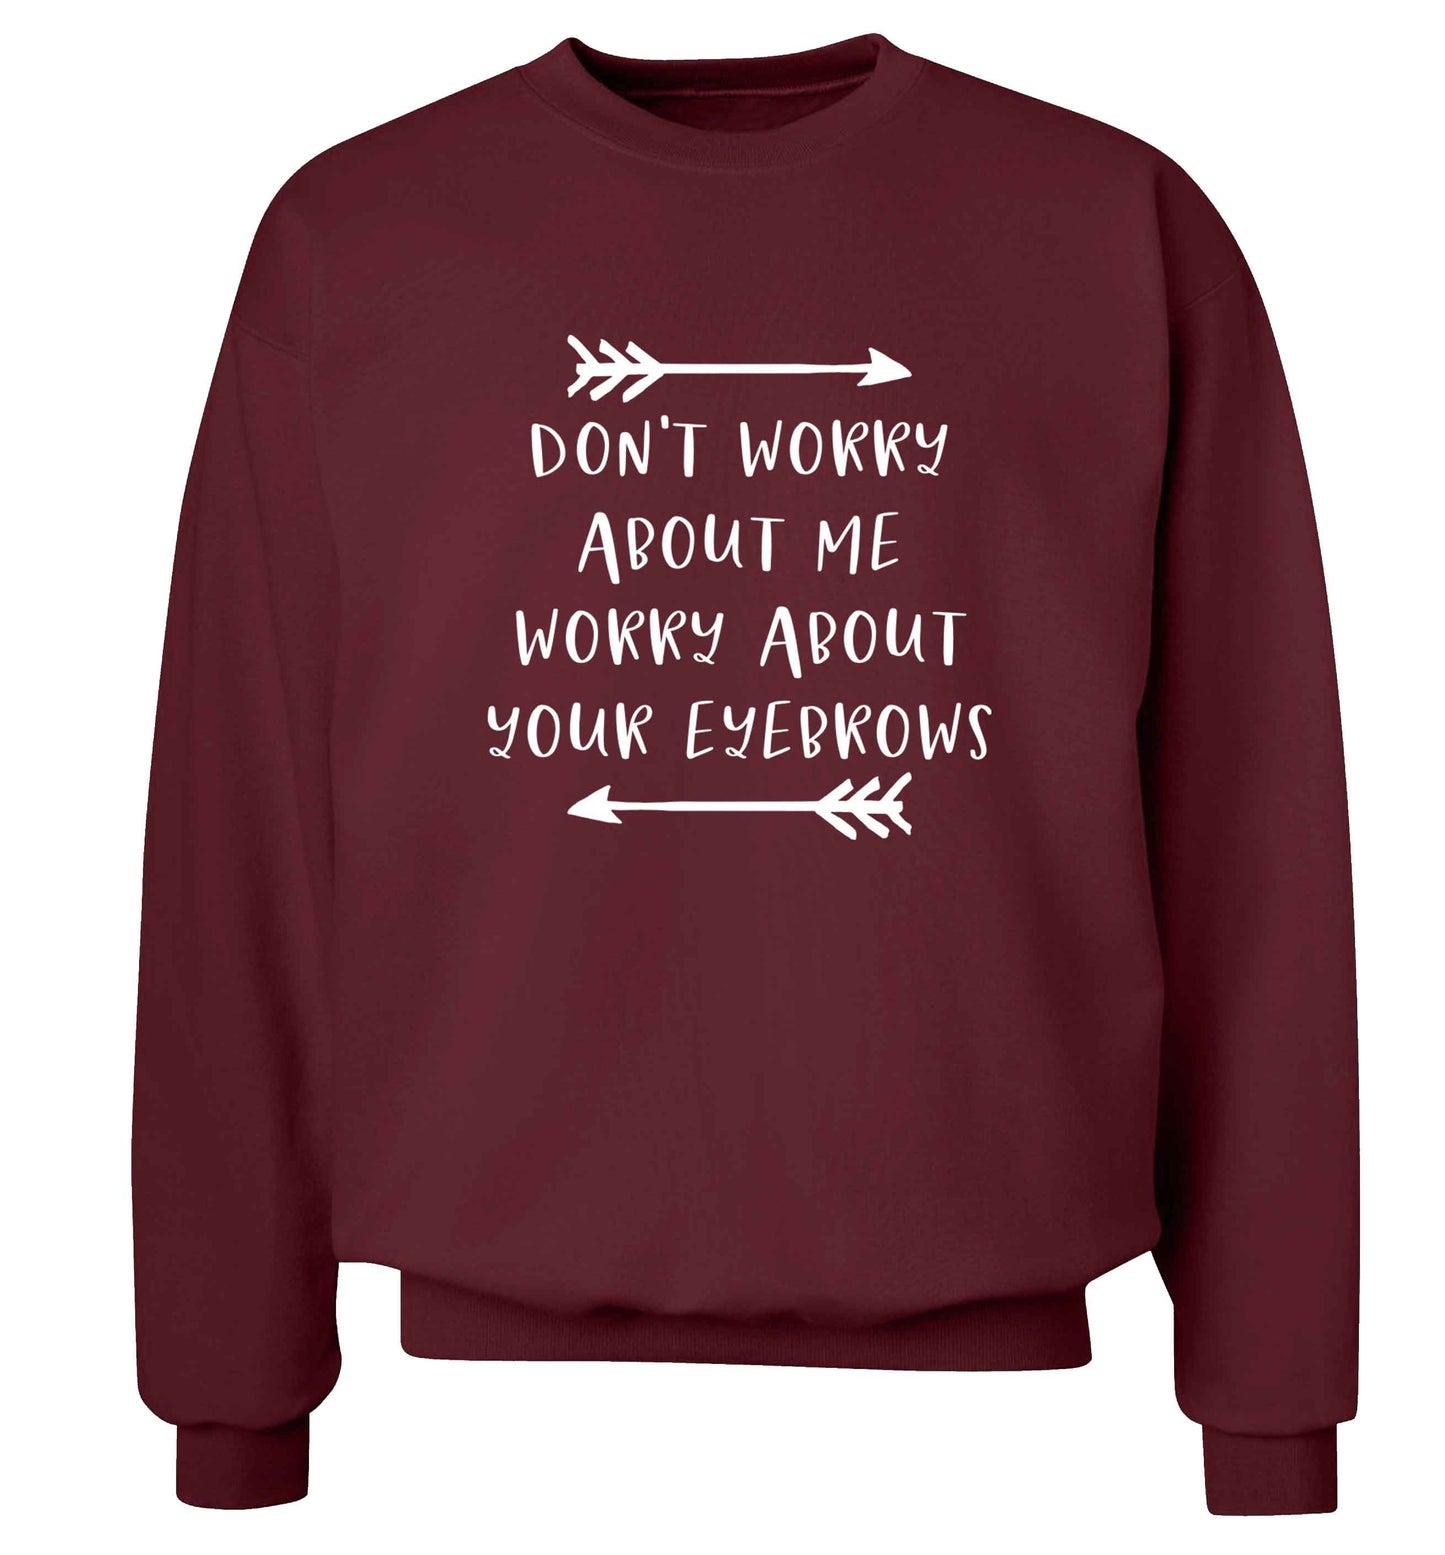 Don't worry about me worry about your eyebrows adult's unisex maroon sweater 2XL